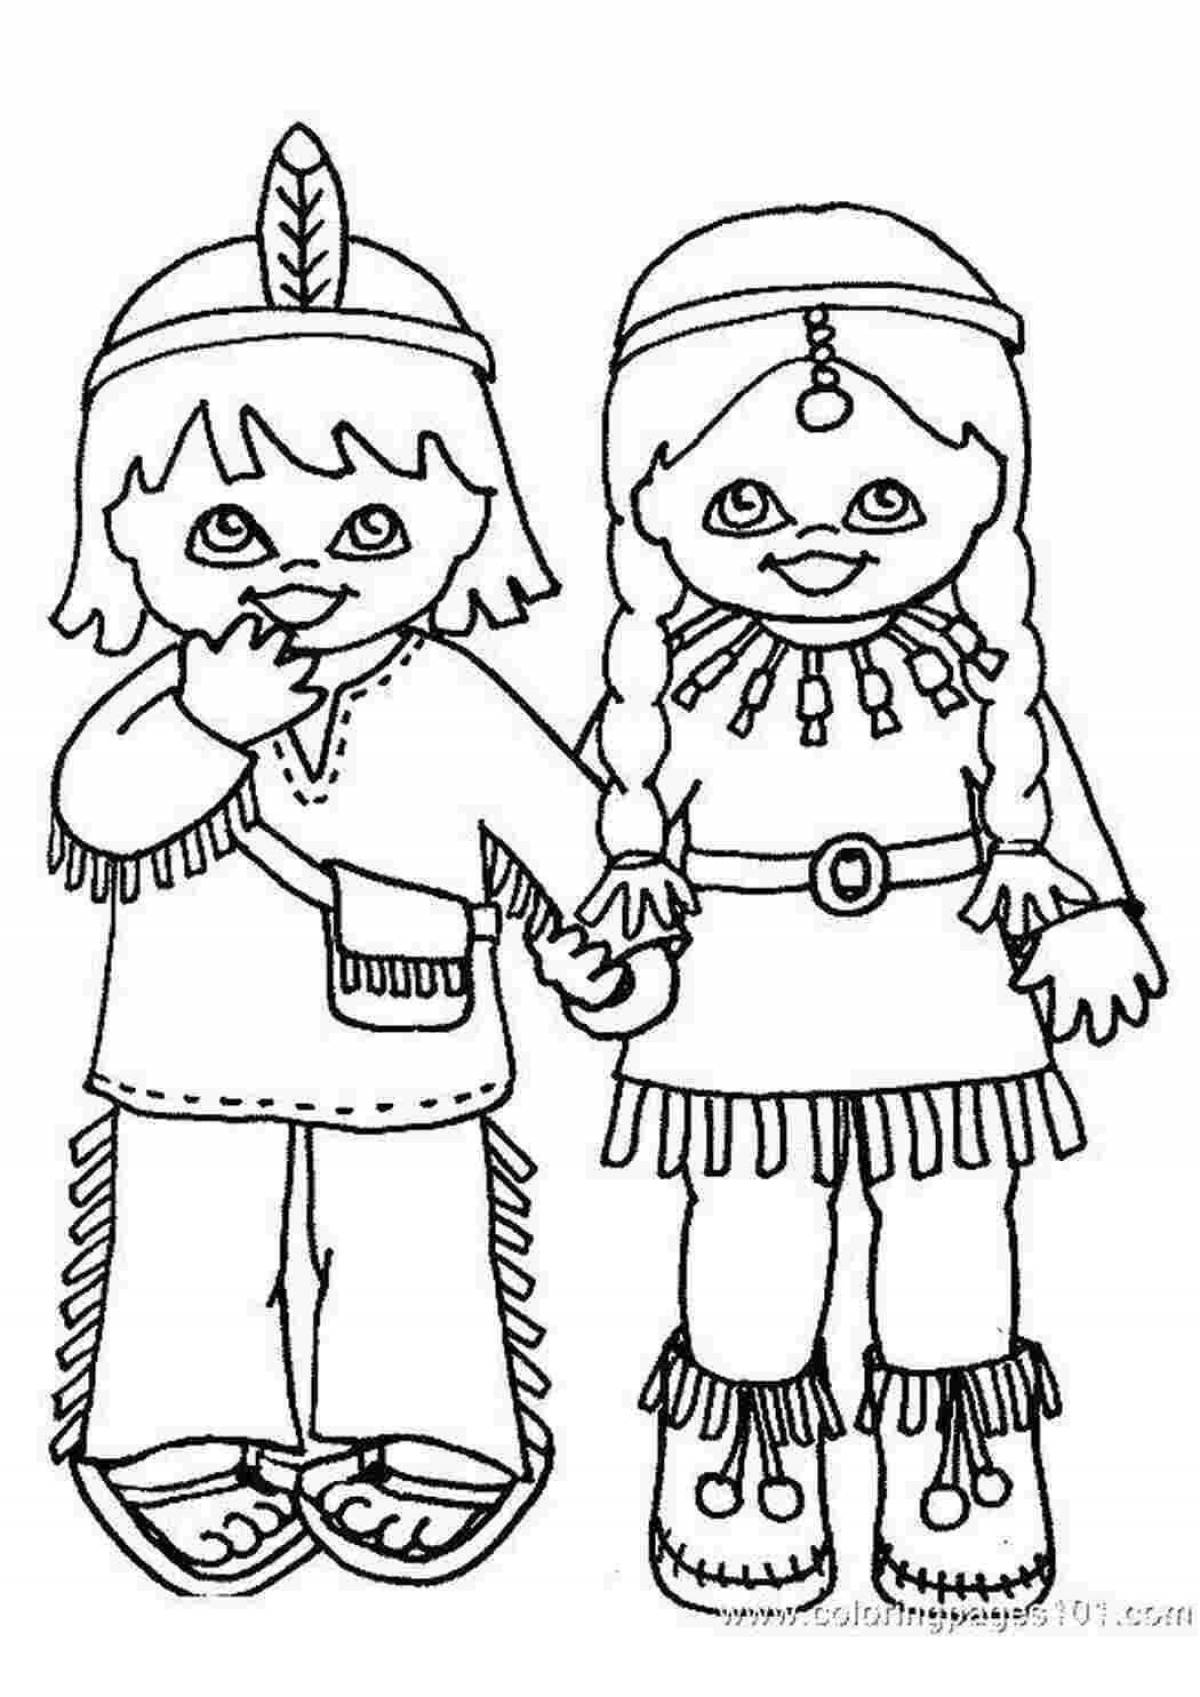 Bright Sami coloring book for the little ones